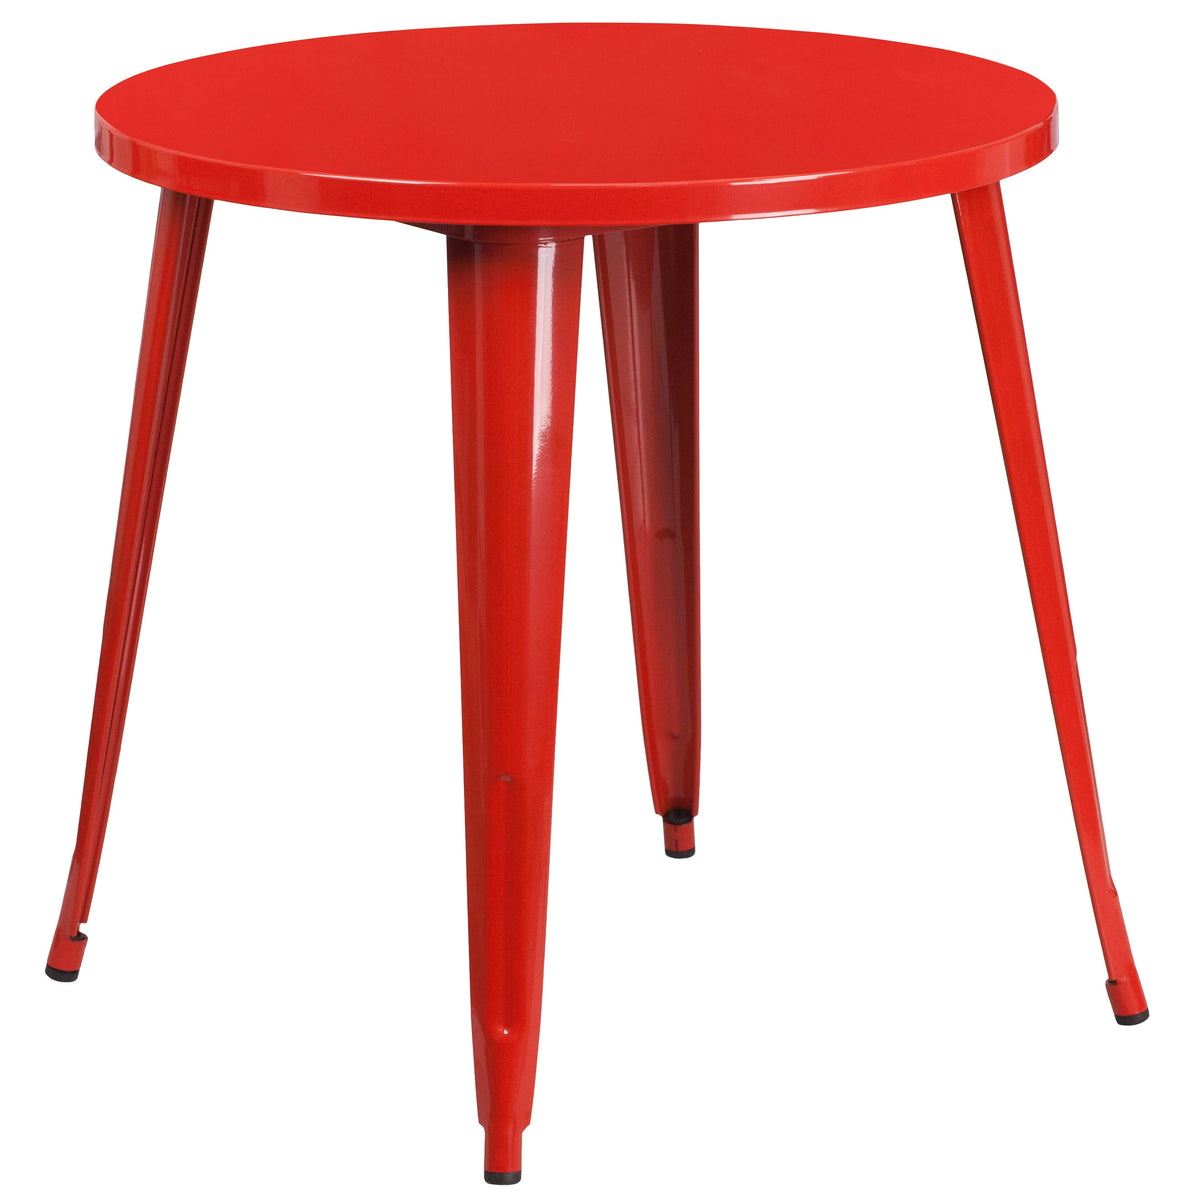 Red |#| 30inch Round Red Metal Indoor-Outdoor Table Set with 2 Vertical Slat Back Chairs